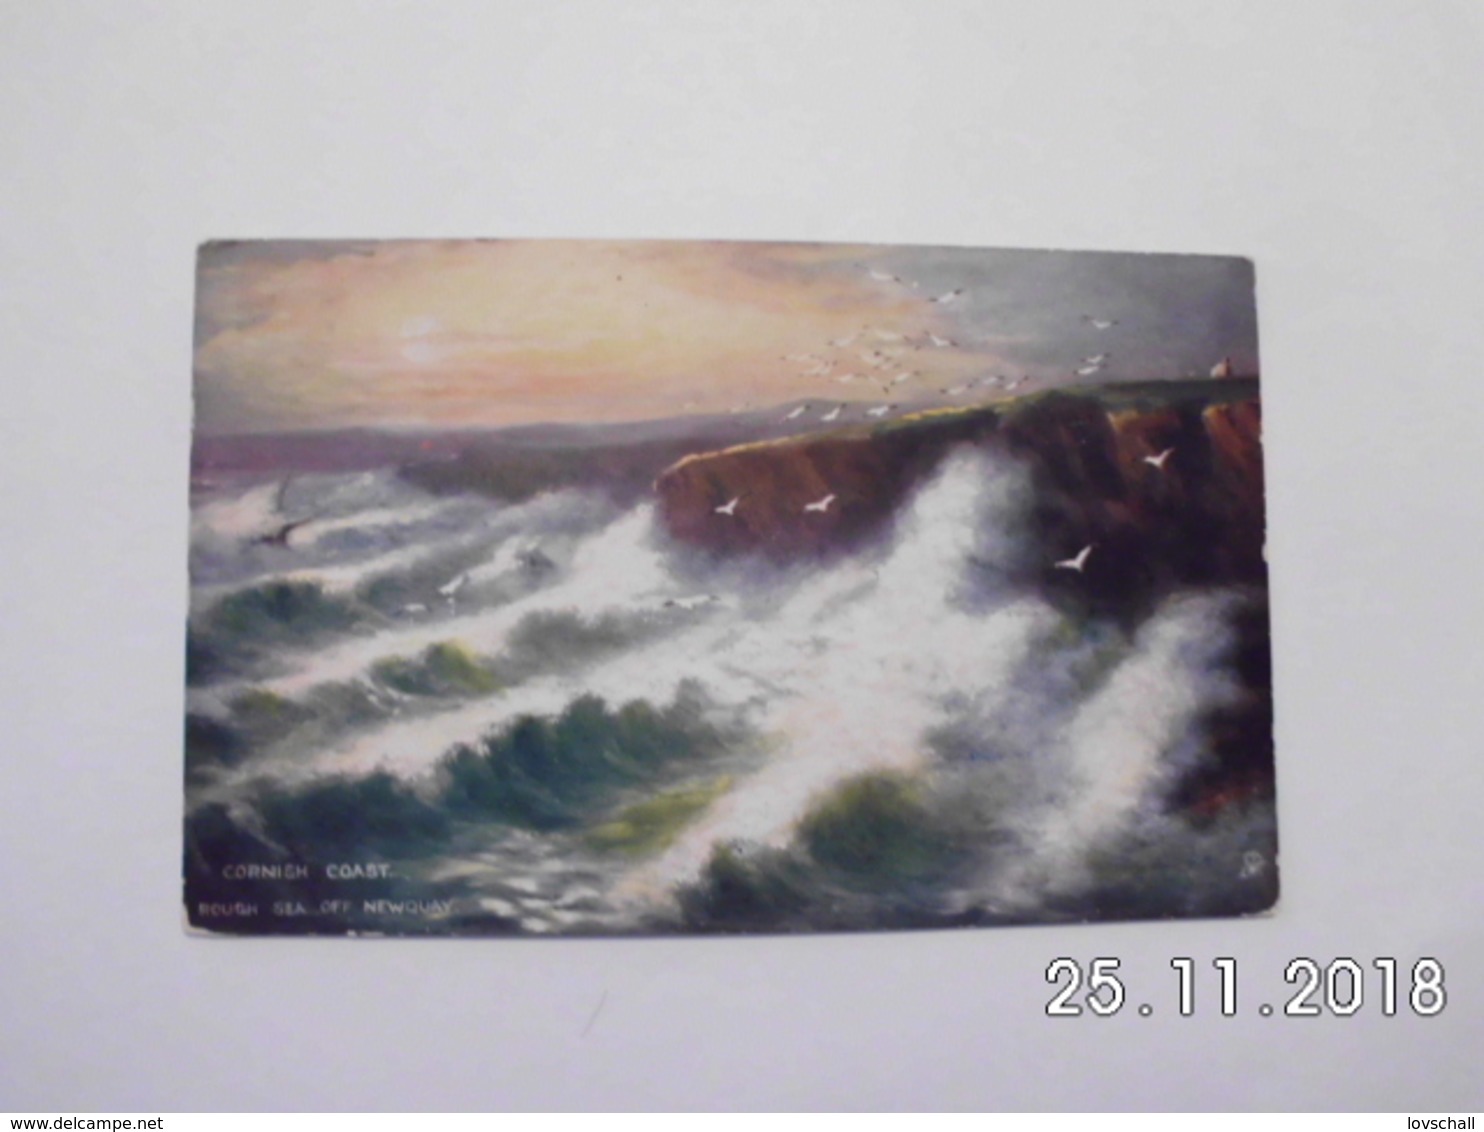 Cornish Coast.(Rough See Of Newquay. - Bedruthan Steps.) ( 2 Cards ) - Newquay